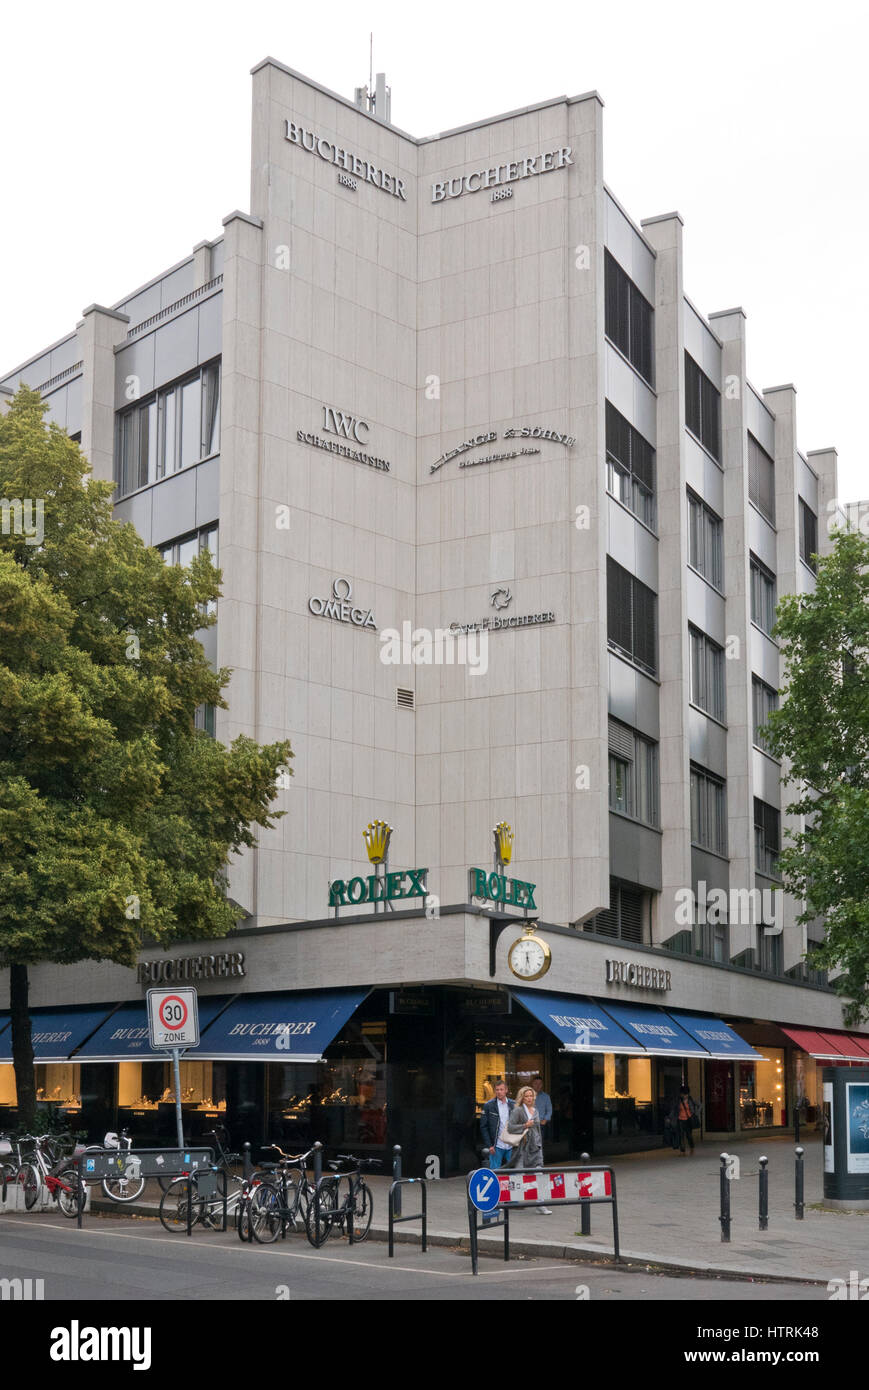 The exterior of a Jewellery and watches shop with several famous brands, Berlin, Germany Stock Photo